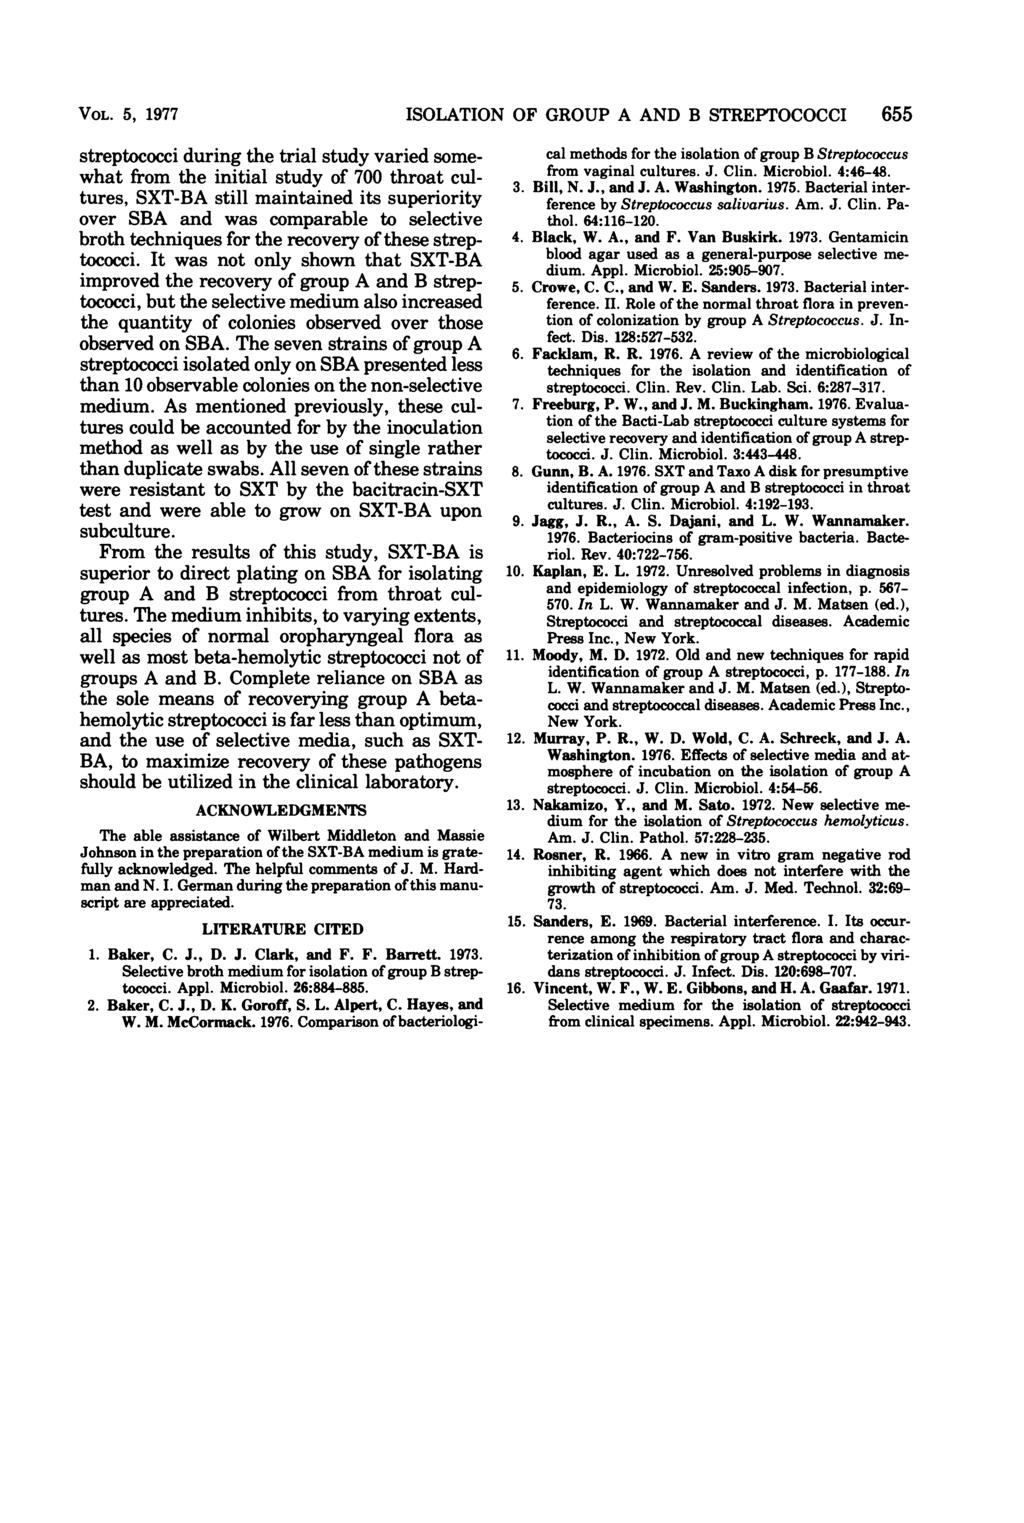 VOL. 5, 1977 streptococci during the trial study varied somewhat from the initial study of 700 throat cultures, SXT-BA still maintained its superiority over SBA and was comparable to selective broth